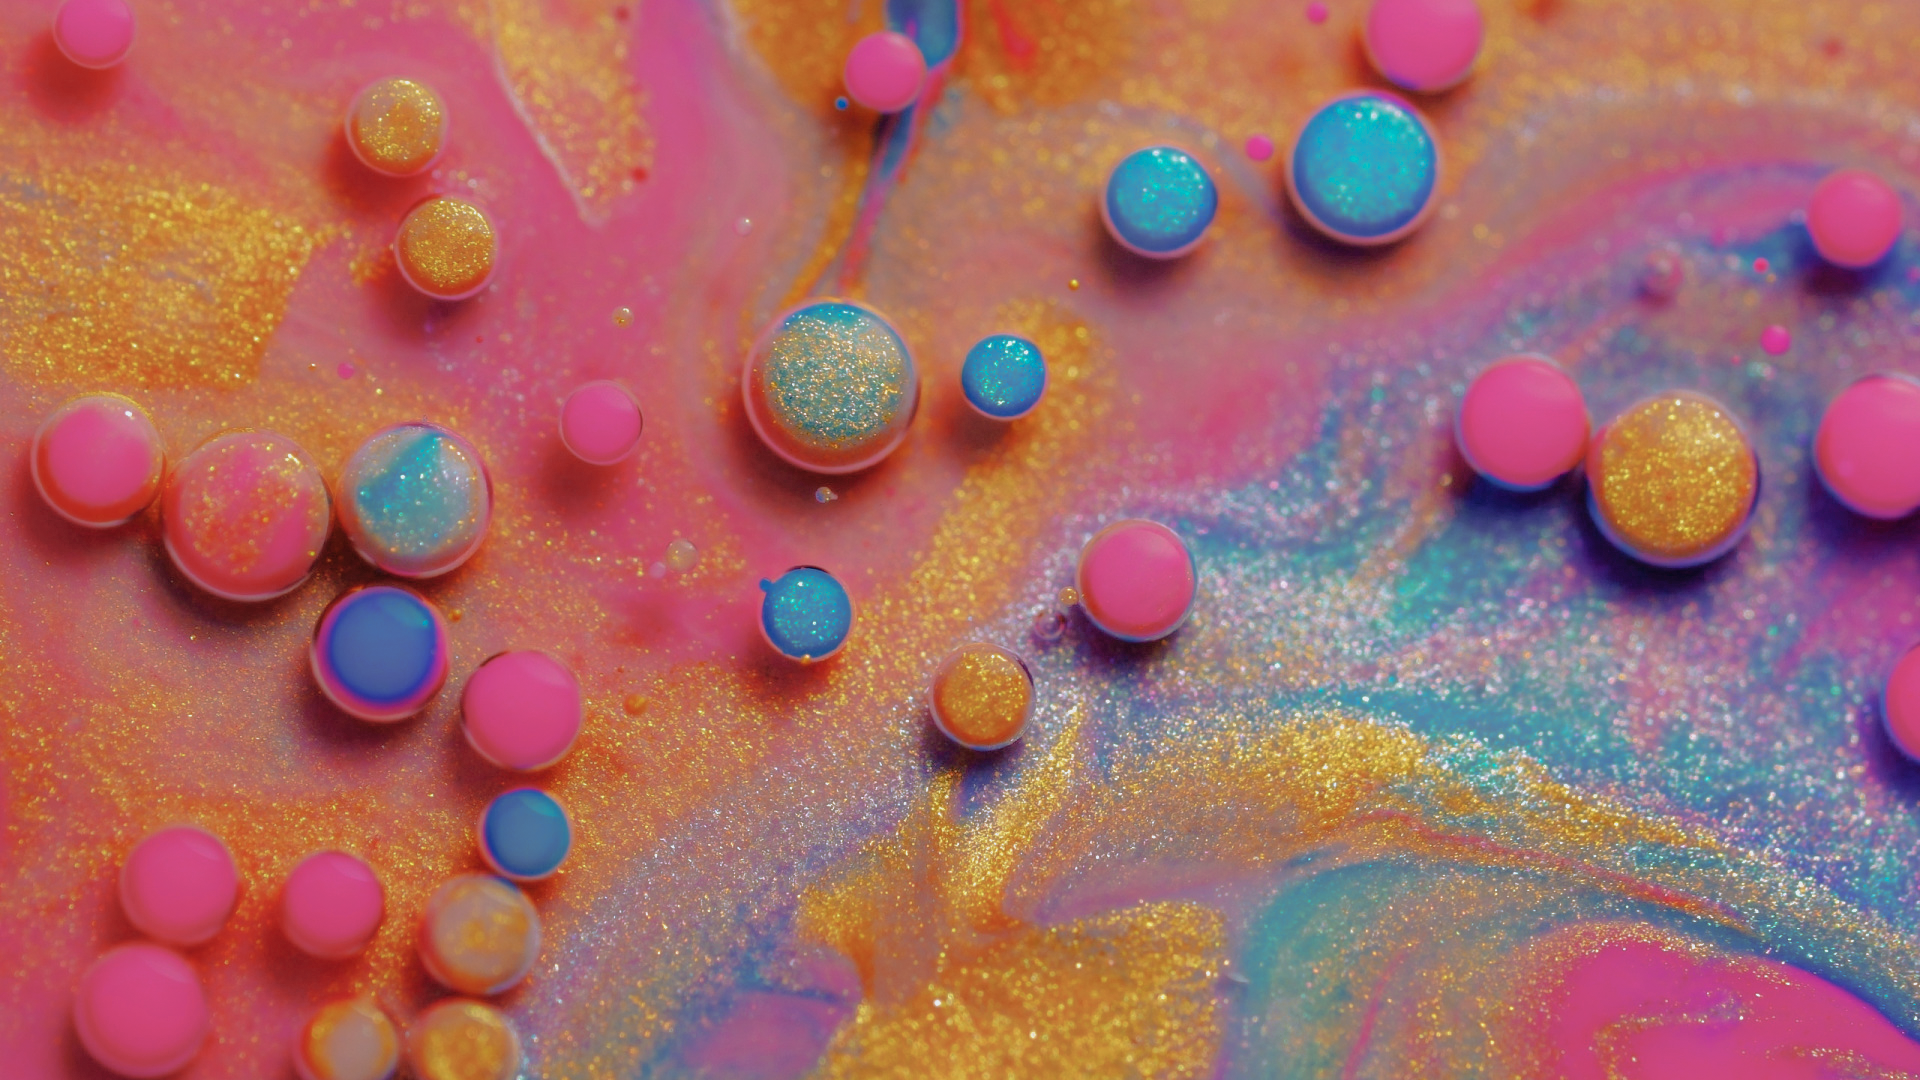 Ball Colorful Glitter Abstract 1920x1080